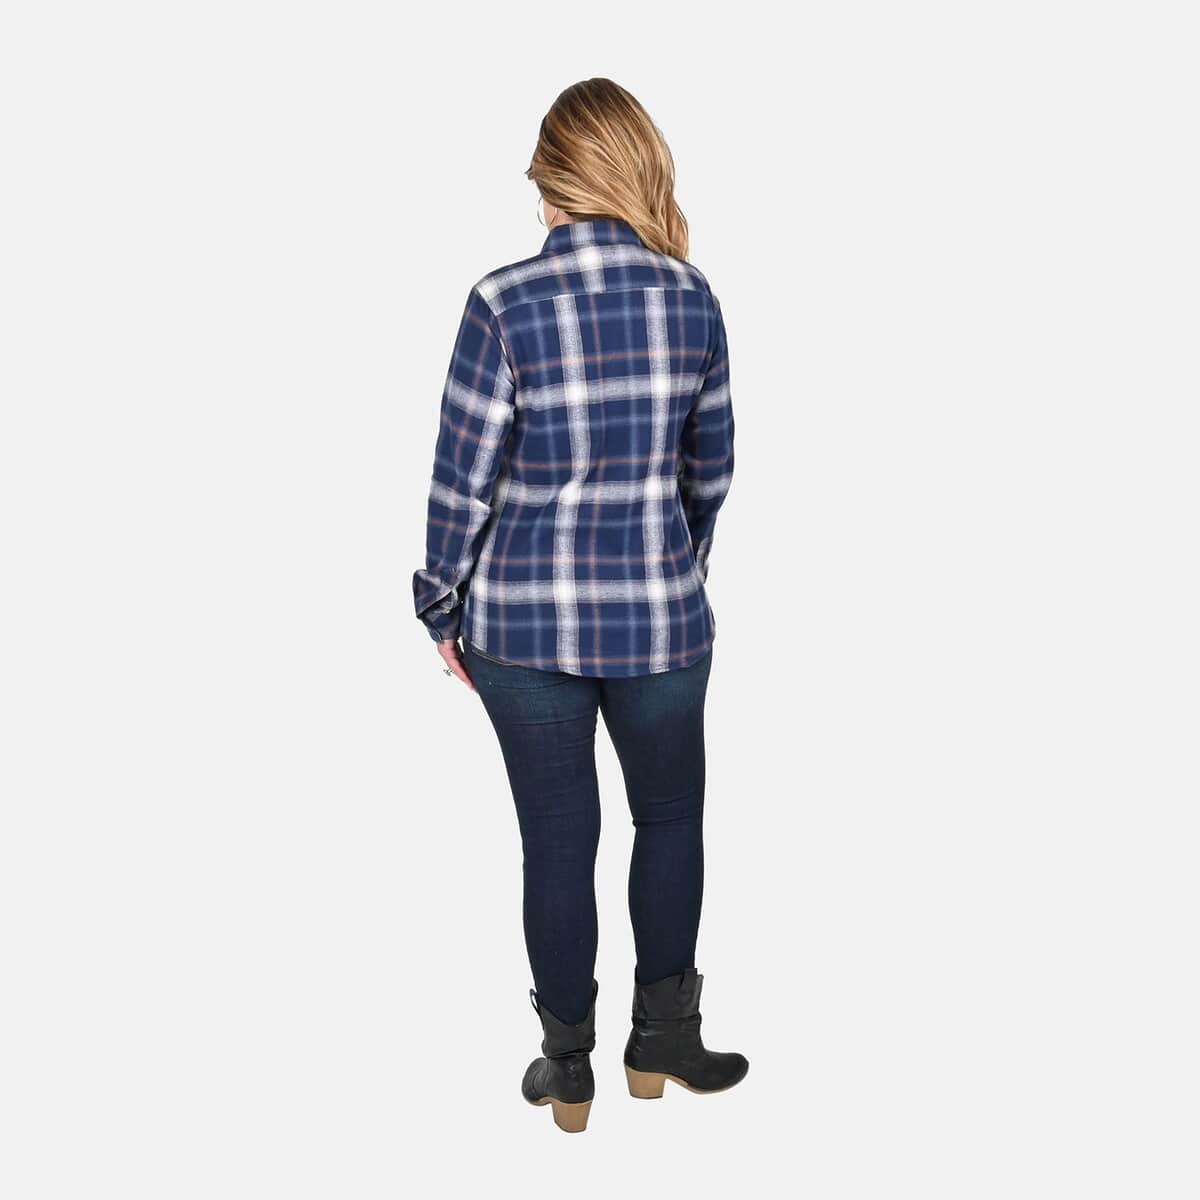 Victory Sportswear Blue and White Plaid Pattern Cotton Flannel Shirt - L image number 1